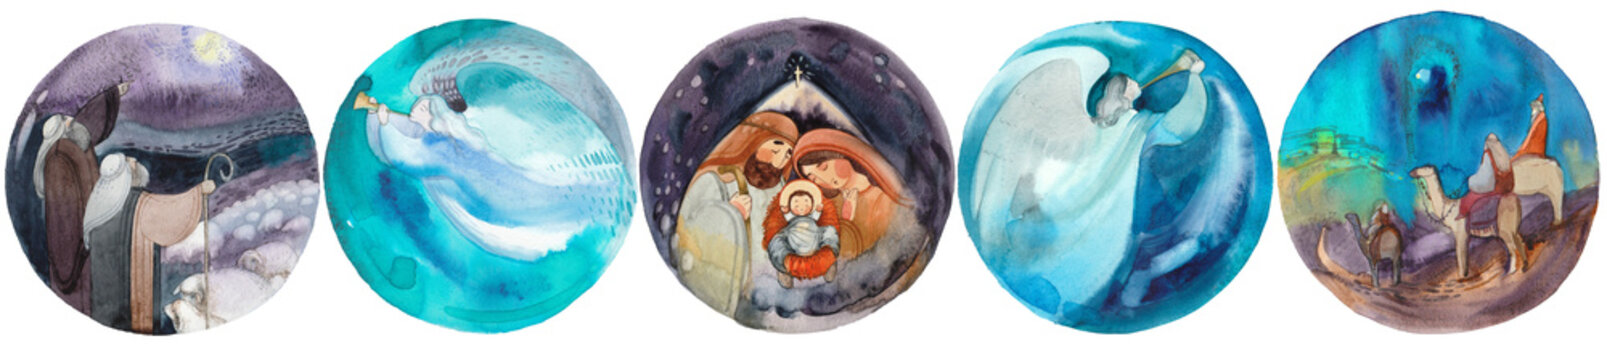 Watercolor illustrations with the nativity scene of St. Mary, Joseph and Jesus in a manger, three wise men on camels, shepherds with sheeps, angels trumpeting in a circle. Christian christmas design